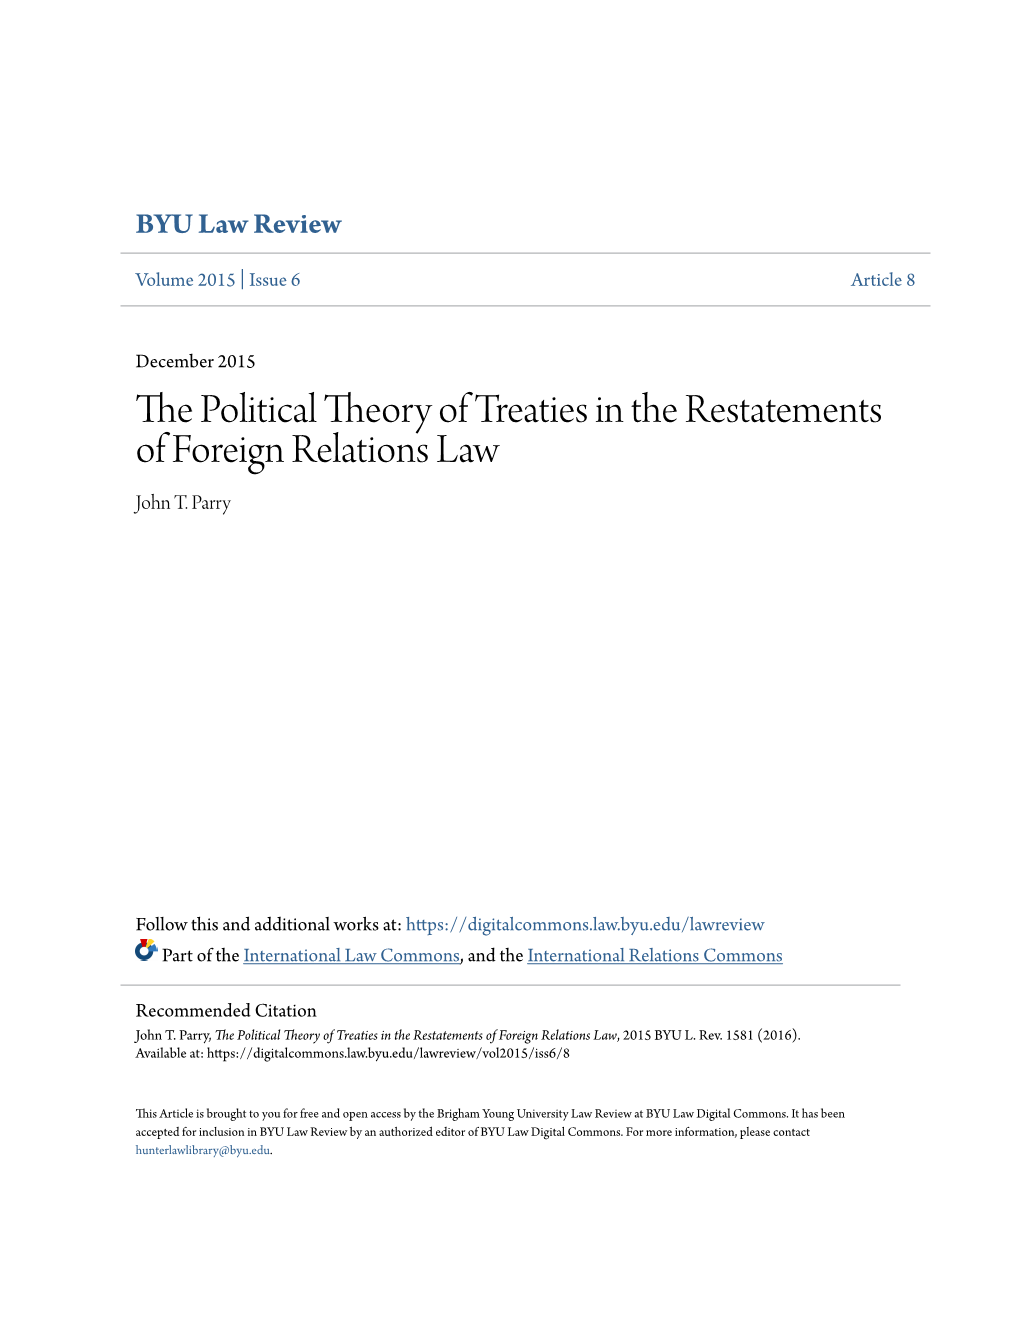 The Political Theory of Treaties in the Restatements of Foreign Relations Law, 2015 BYU L